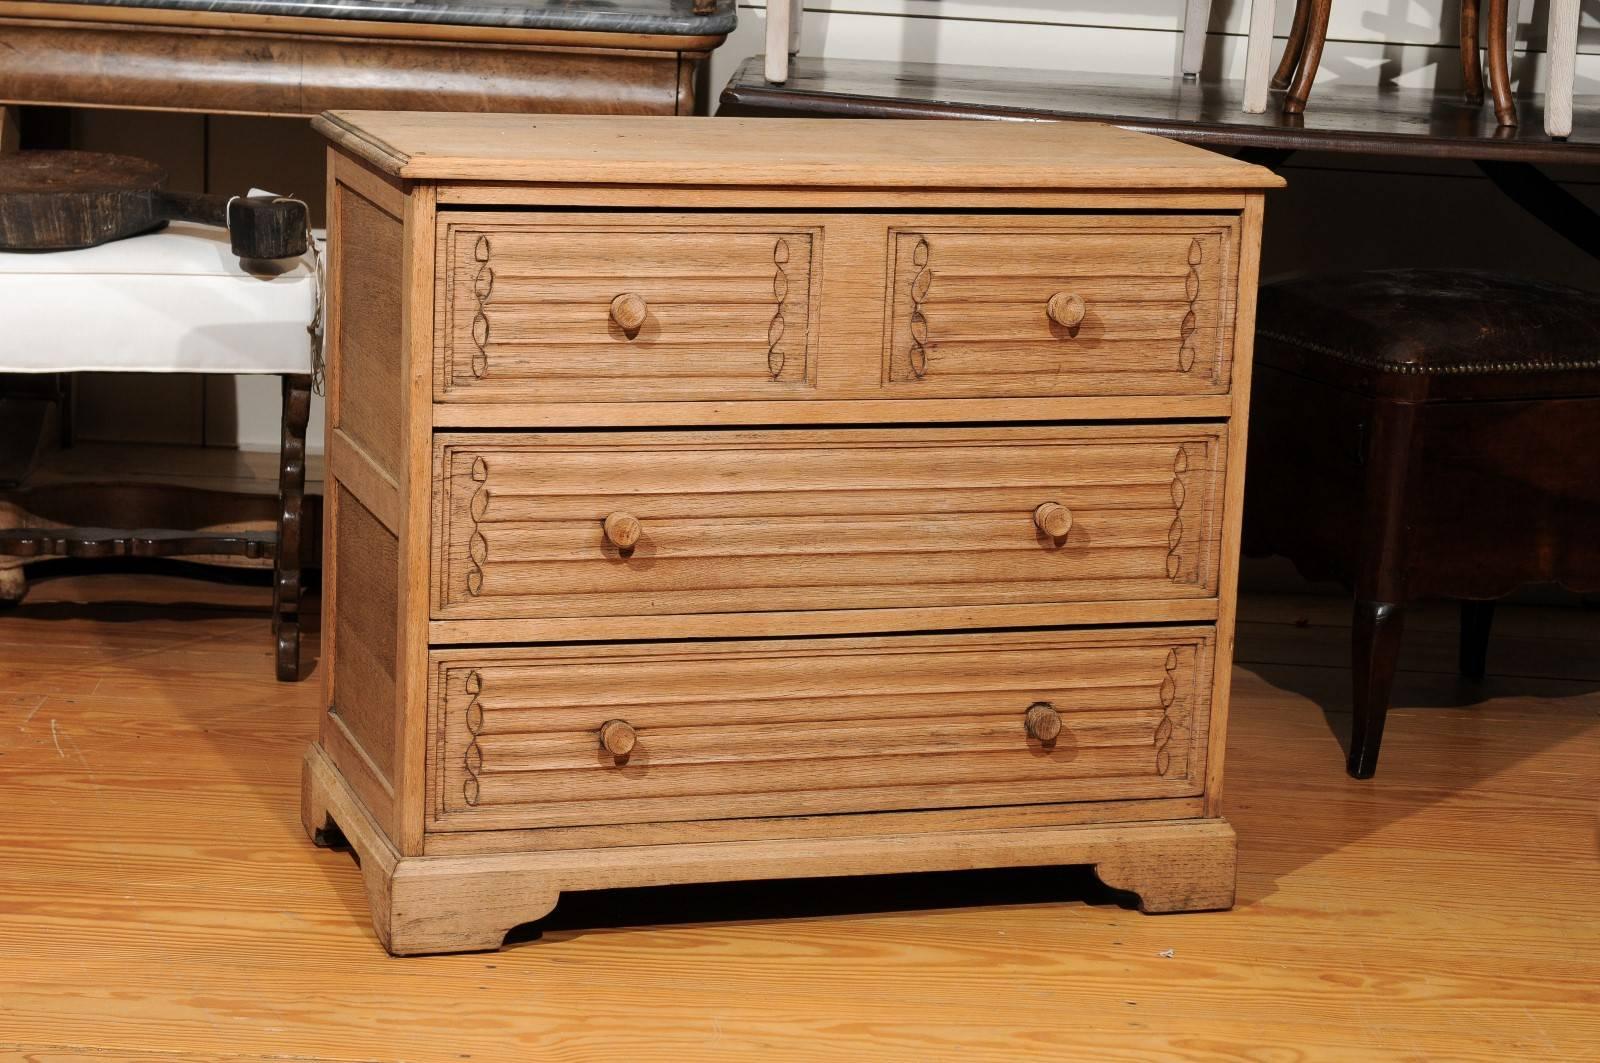 This English oak chest from the late 19th century features a rectangular top with rounded edges over three drawers. The top drawer's decoration gives the illusion of two drawers, but is in reality a single drawer segmented into two halves. The decor